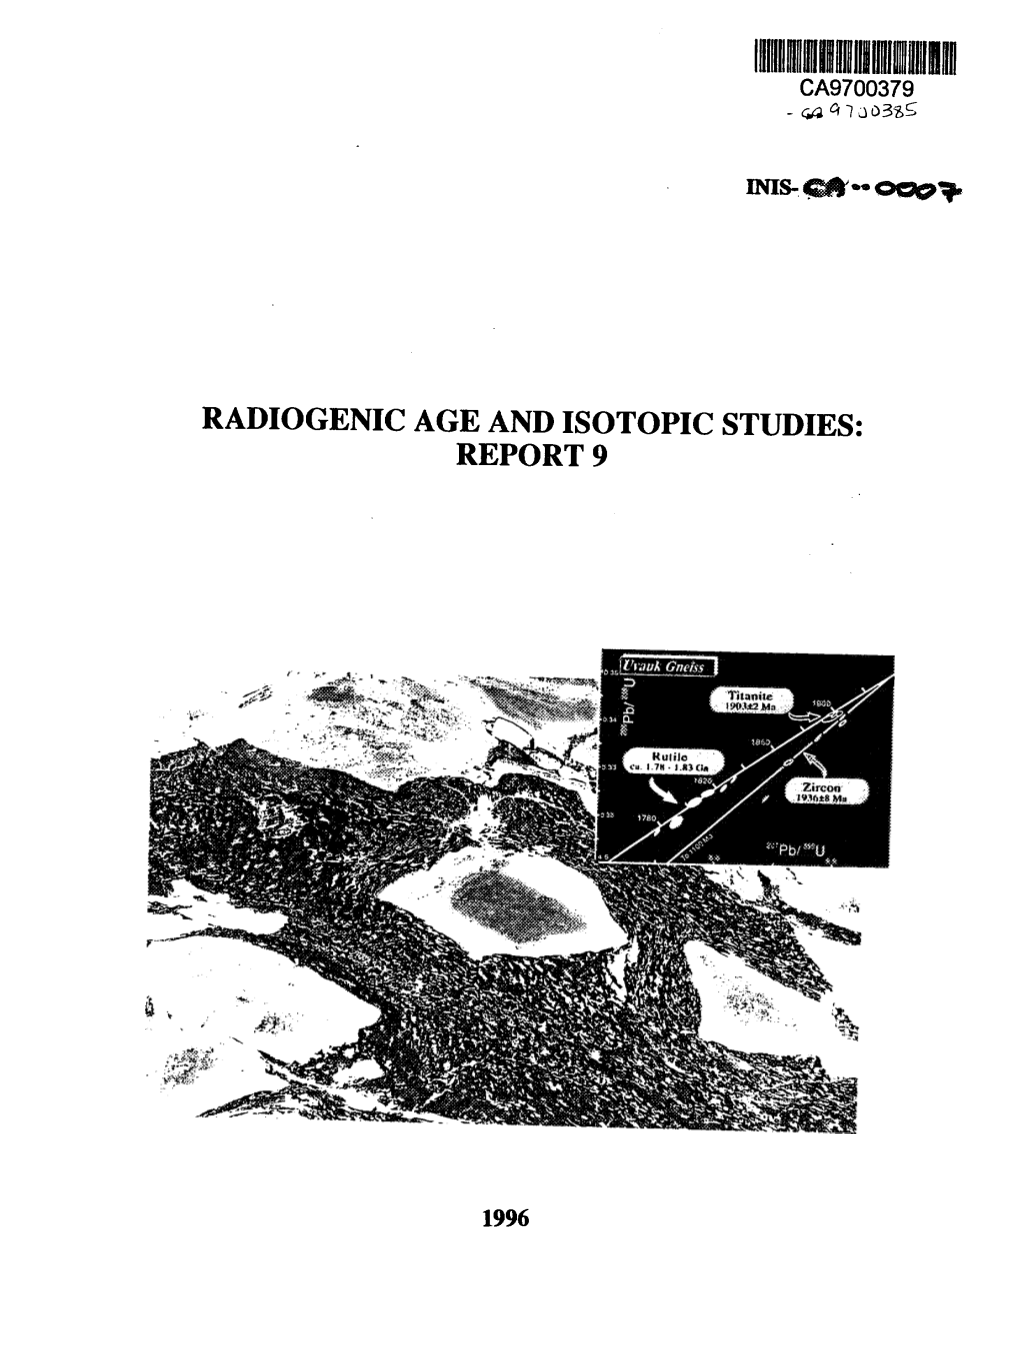 Radiogenic Age and Isotopic Studies: Report 9. Current Research 1995-F